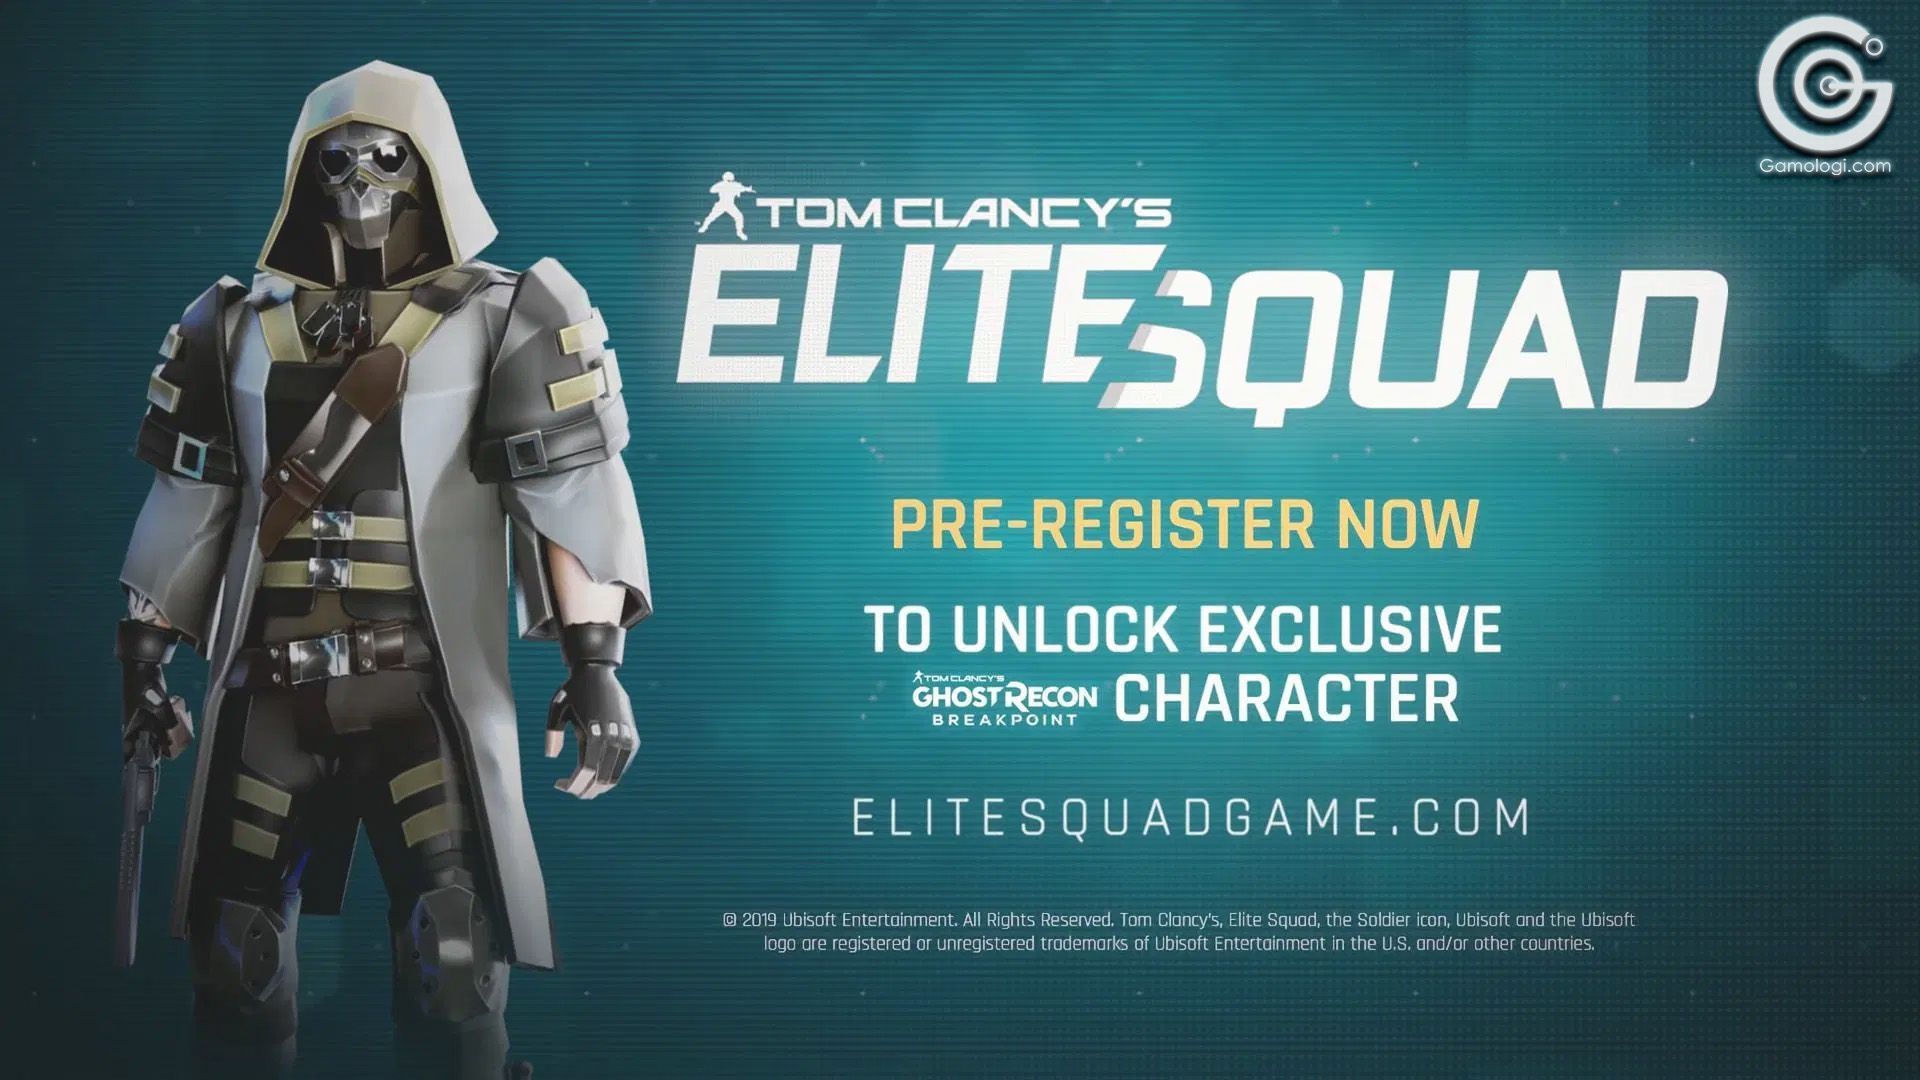 Tom Clancy's Elite Squad conducts Closed Beta on mobile